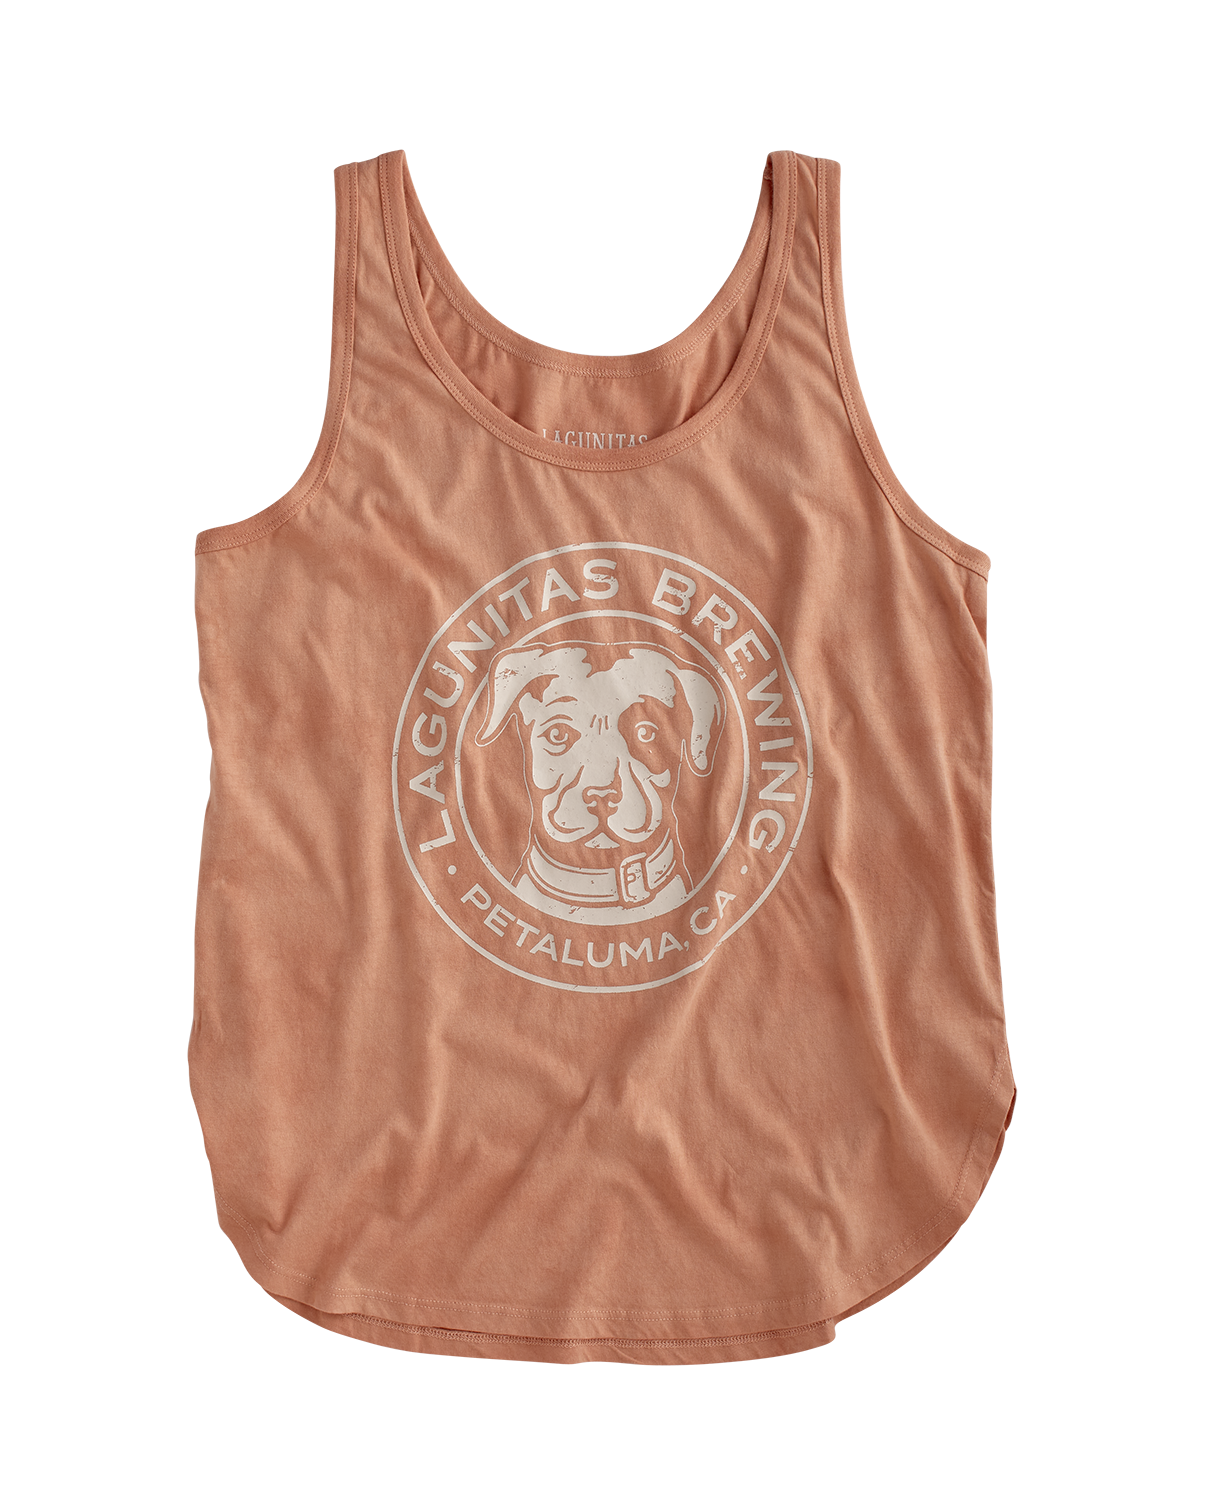 “A stylish tank top with a unique design featuring a dog in a circle and the town name of Petaluma. This Lagunitas brewery merchandise showcases Petaluma-inspired fashion and Lagunitas branding. Made with comfortable and breathable fabric, it's perfect for casual wear. The eye-catching design adds a touch of uniqueness, making it ideal for beer enthusiasts and those who want to represent Petaluma with style.”